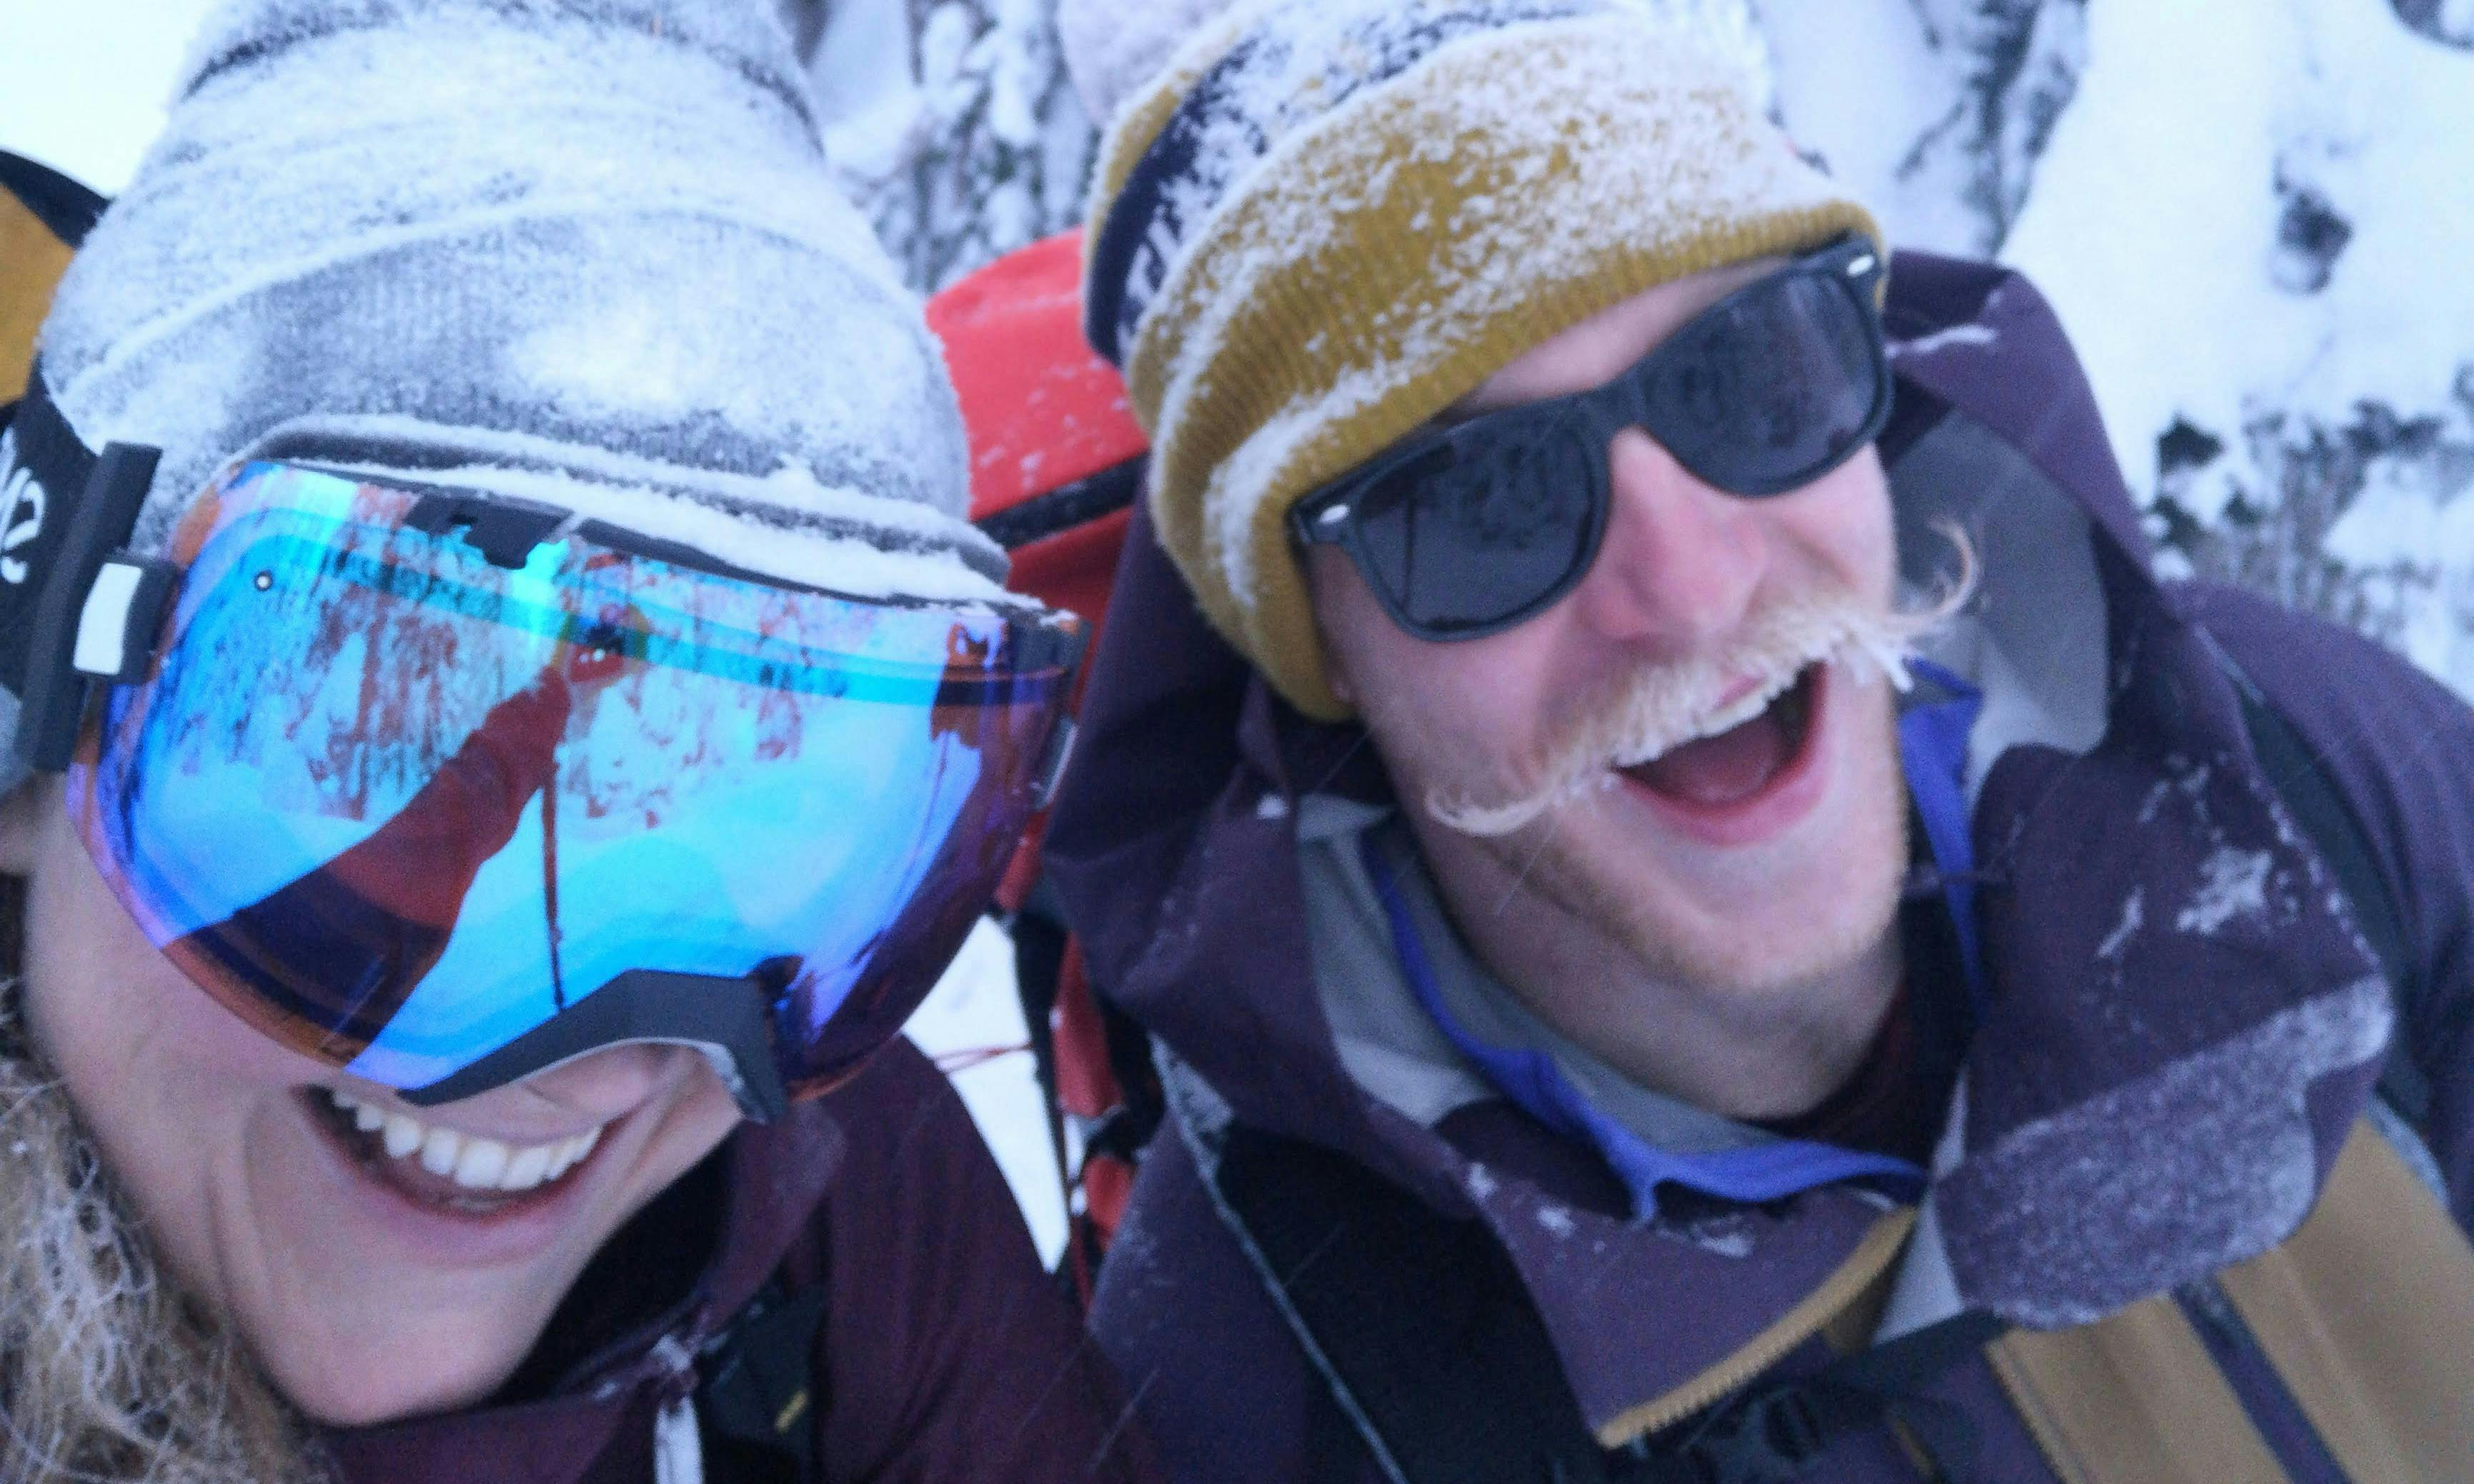 Two skiers, one with a frosty mustache and the other wearing goggles